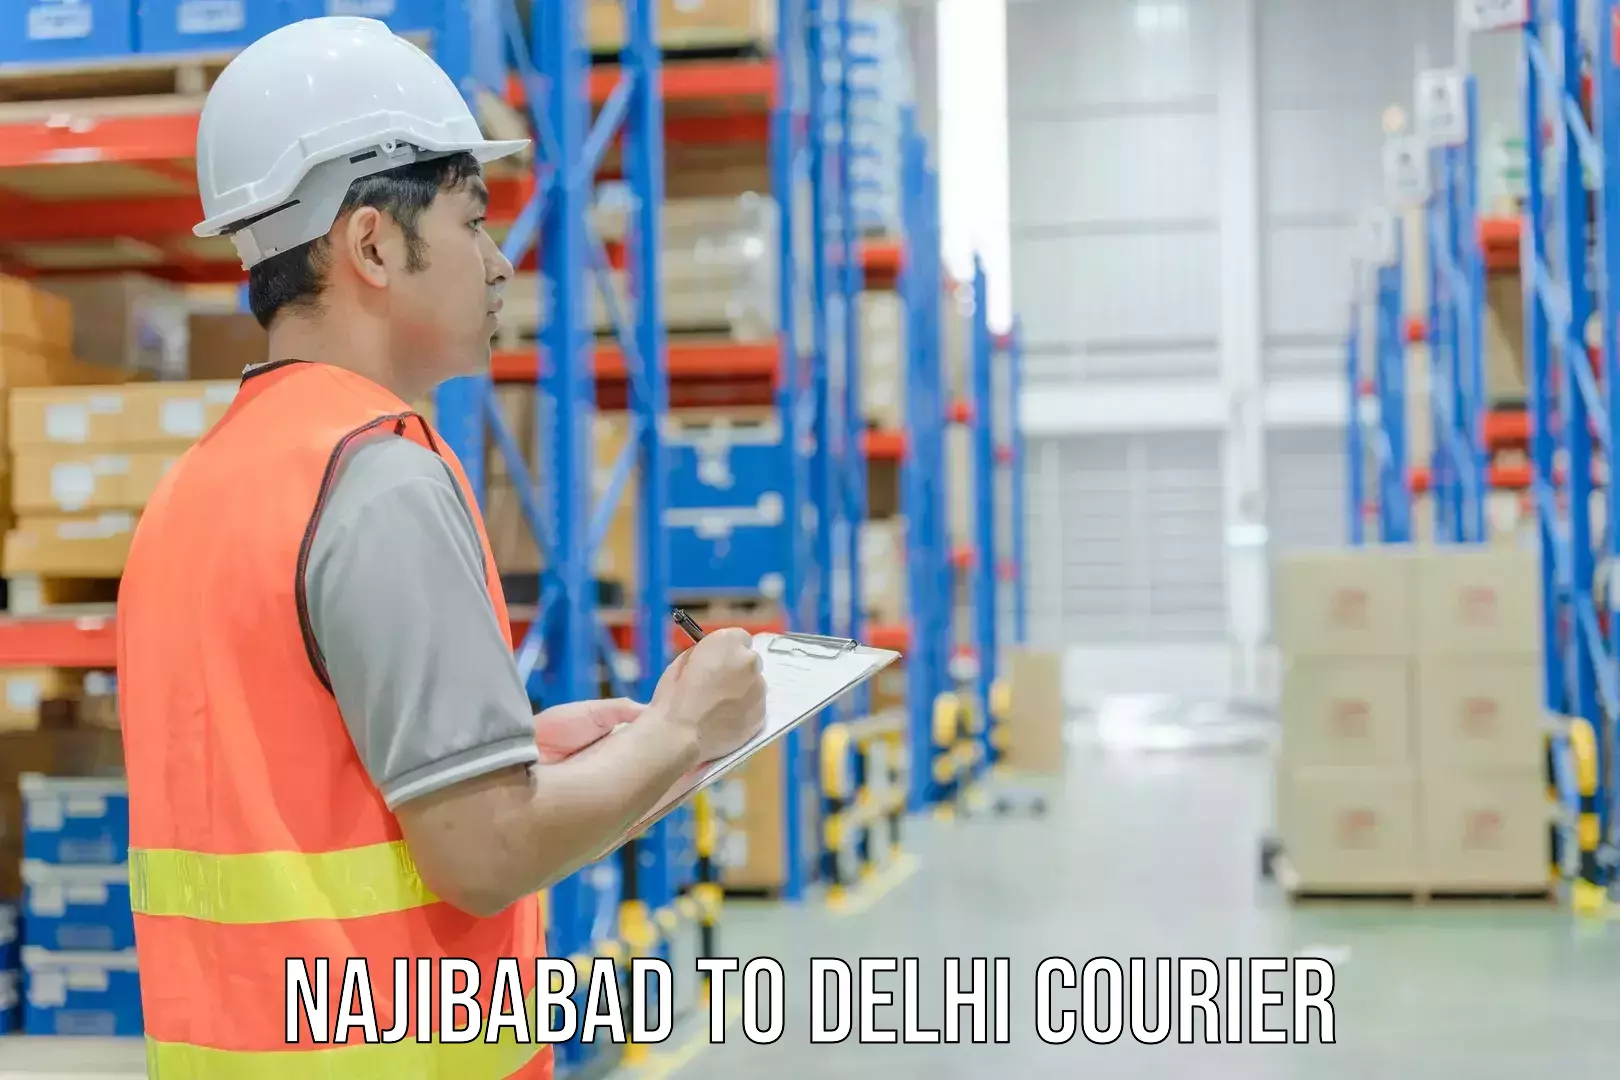 Fastest parcel delivery Najibabad to NCR